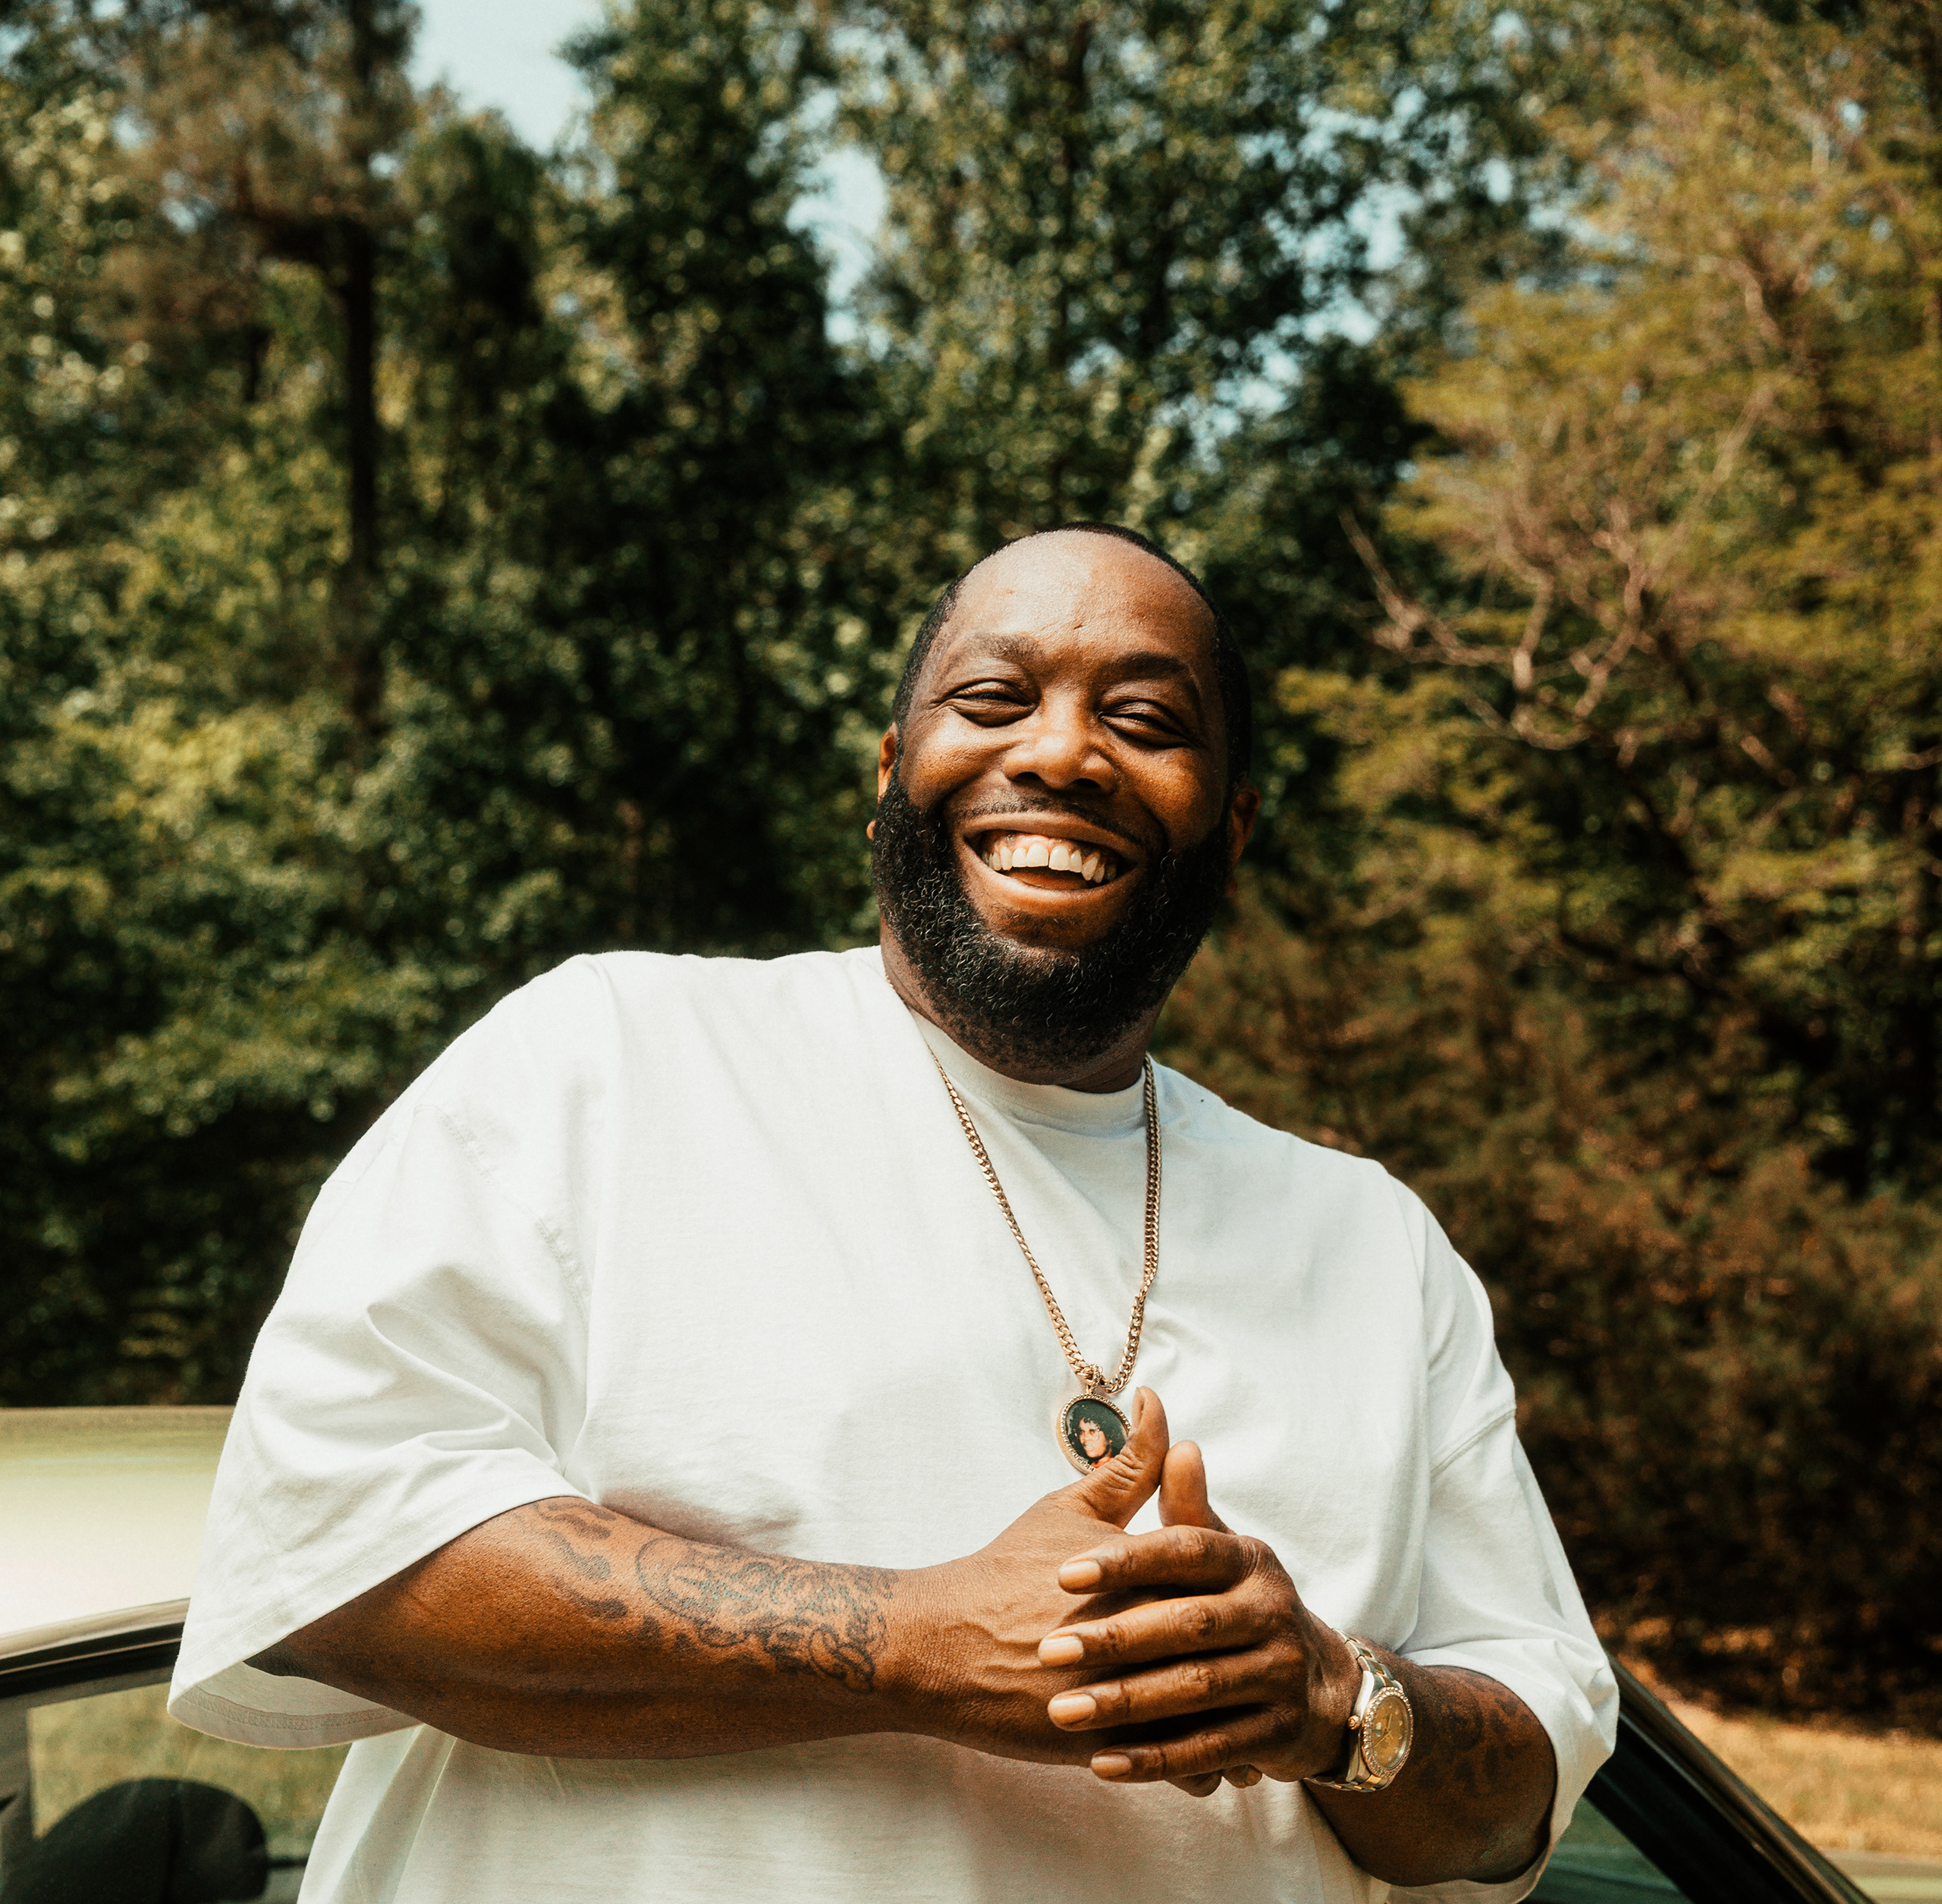 Killer Mike “There really is the Norman Rockwell Americana vision of America